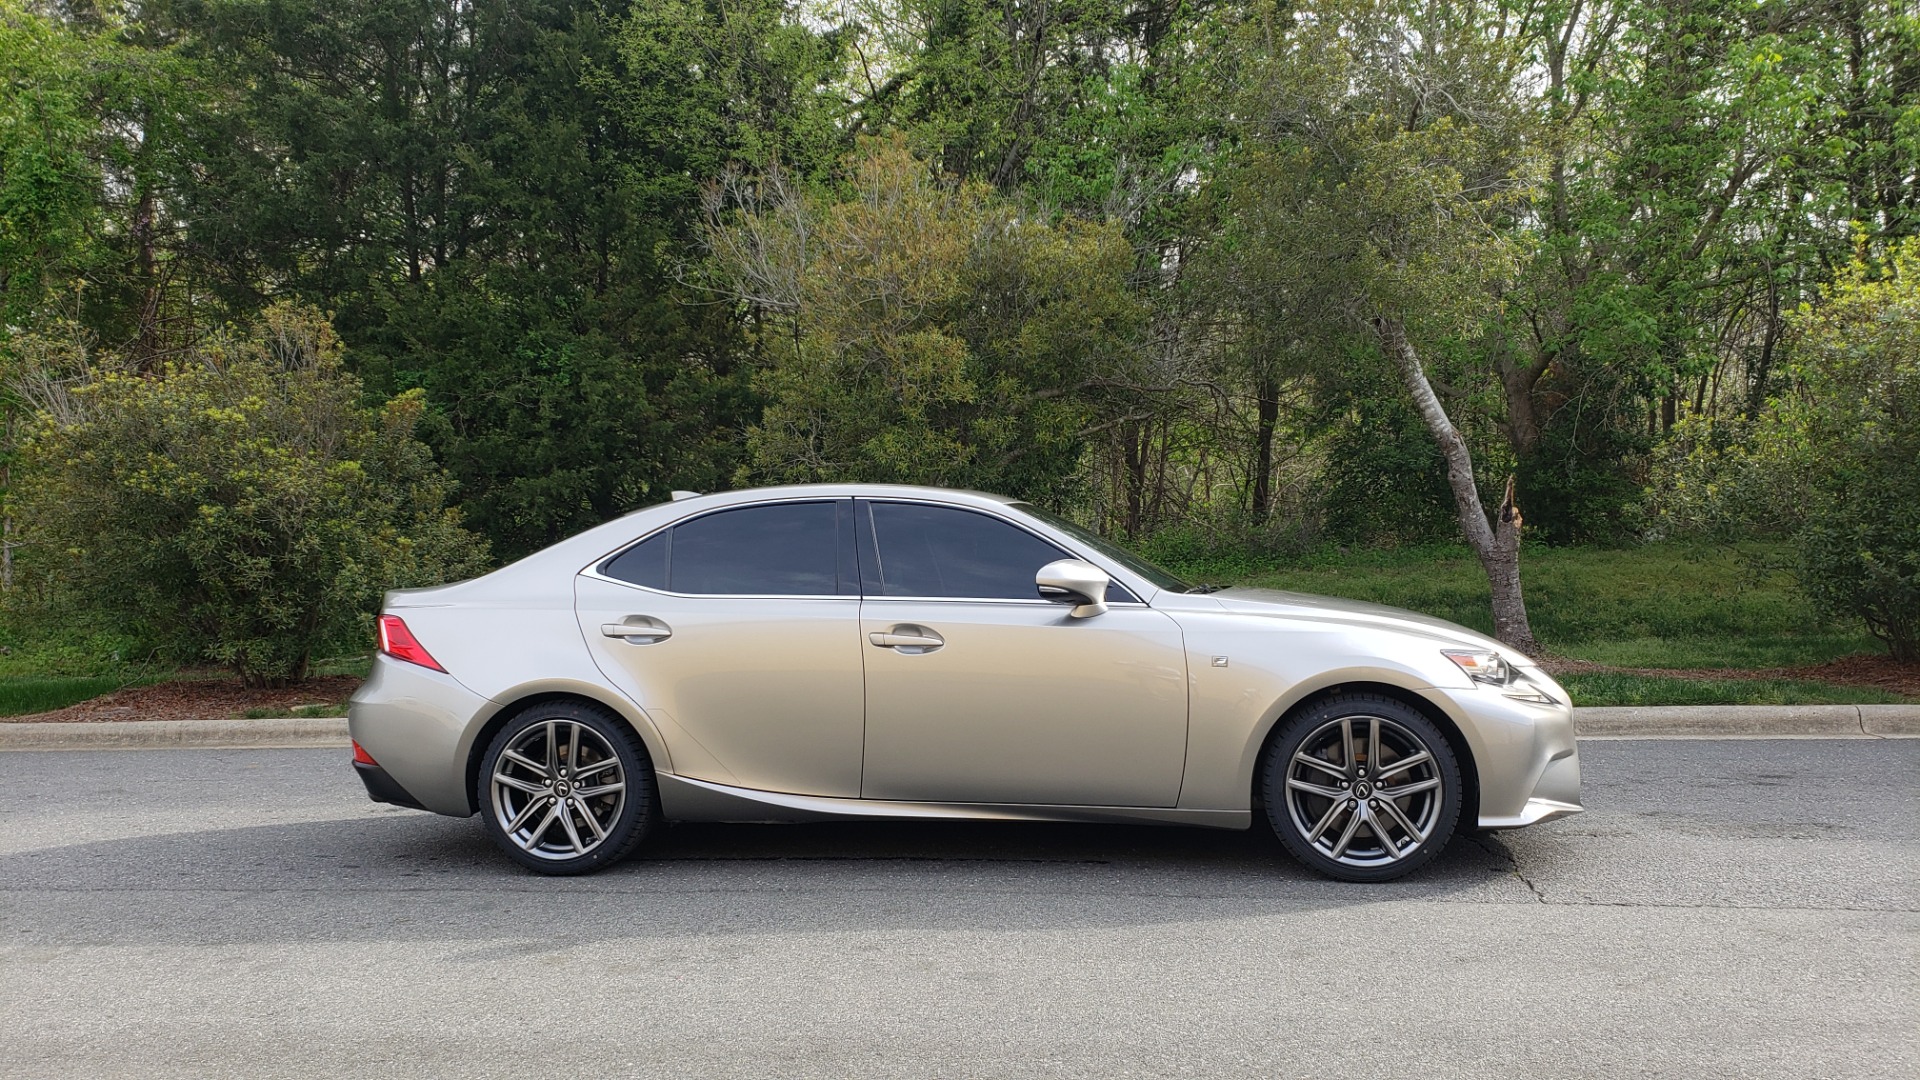 Used 2016 Lexus IS 200T F-SPORT / BSM / SUNROOF / VENTILATED SEATS / REARVIEW for sale Sold at Formula Imports in Charlotte NC 28227 5